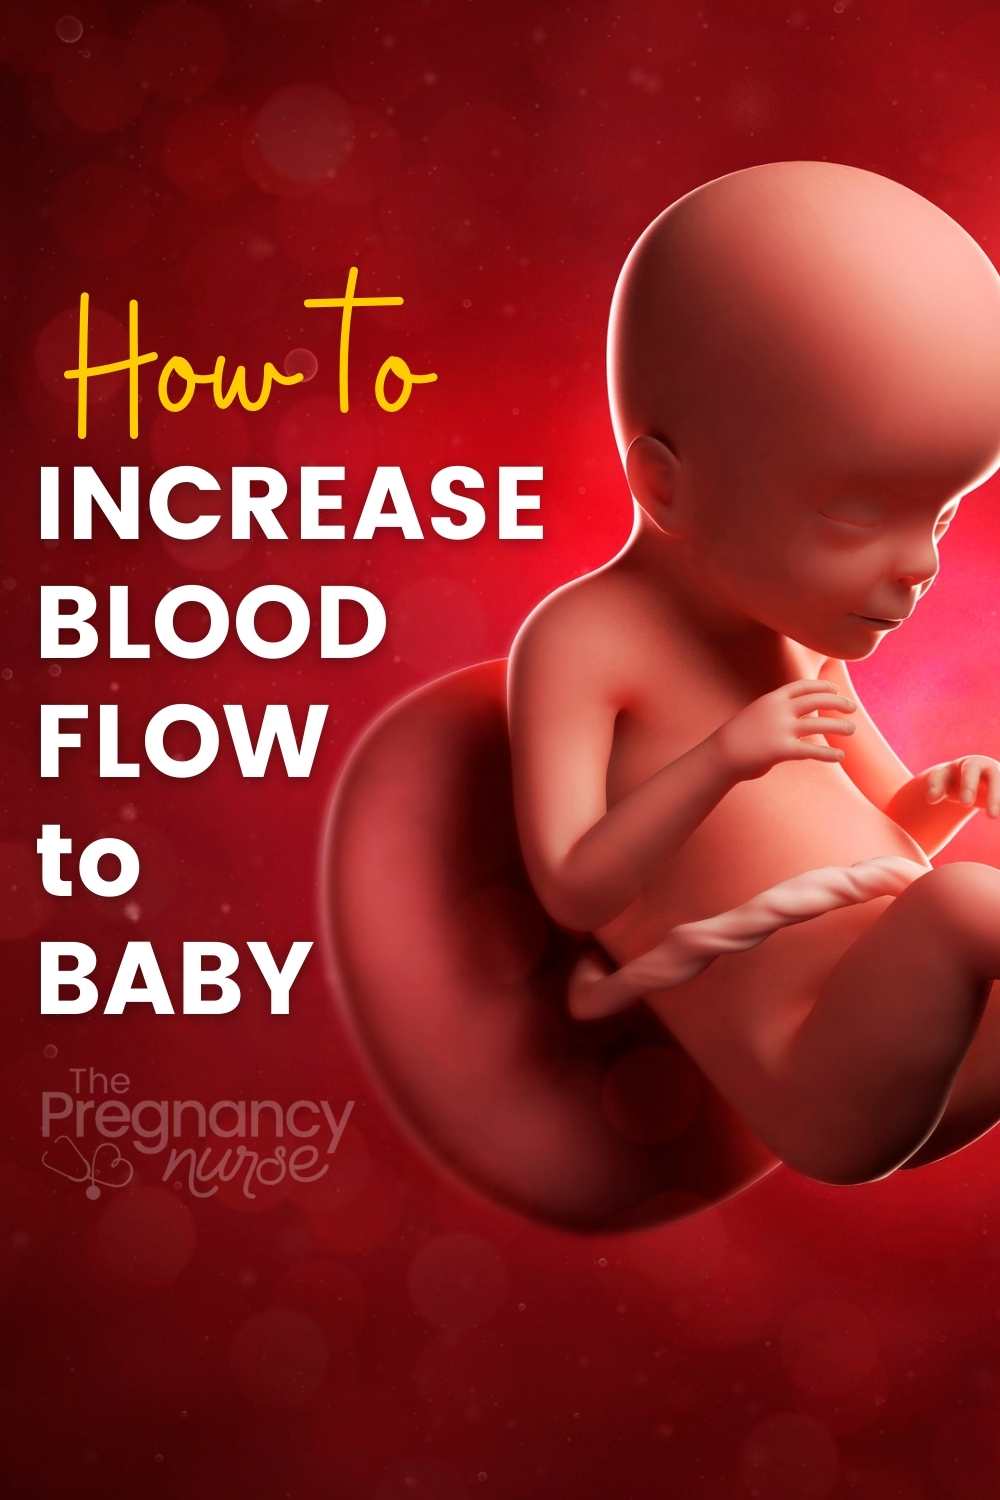 As your baby grows, it becomes more and more important to ensure that they get the blood and oxygen they need. Here are a few ways to help increase blood flow to your baby during pregnancy. By following these tips, you can help give your little one a healthy start!